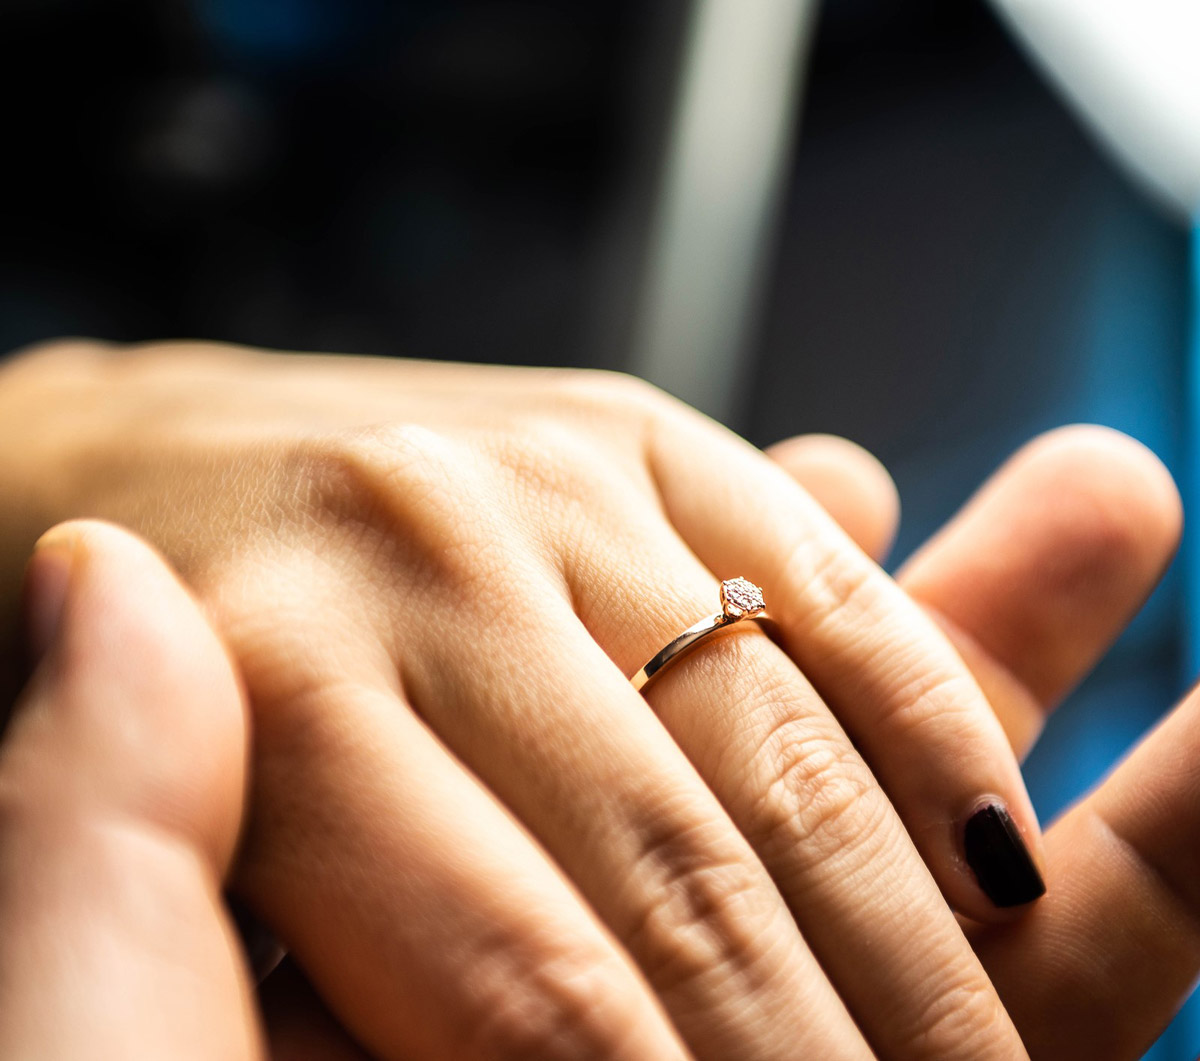 6 Do’s and Don’ts of Caring for Your Engagement Ring